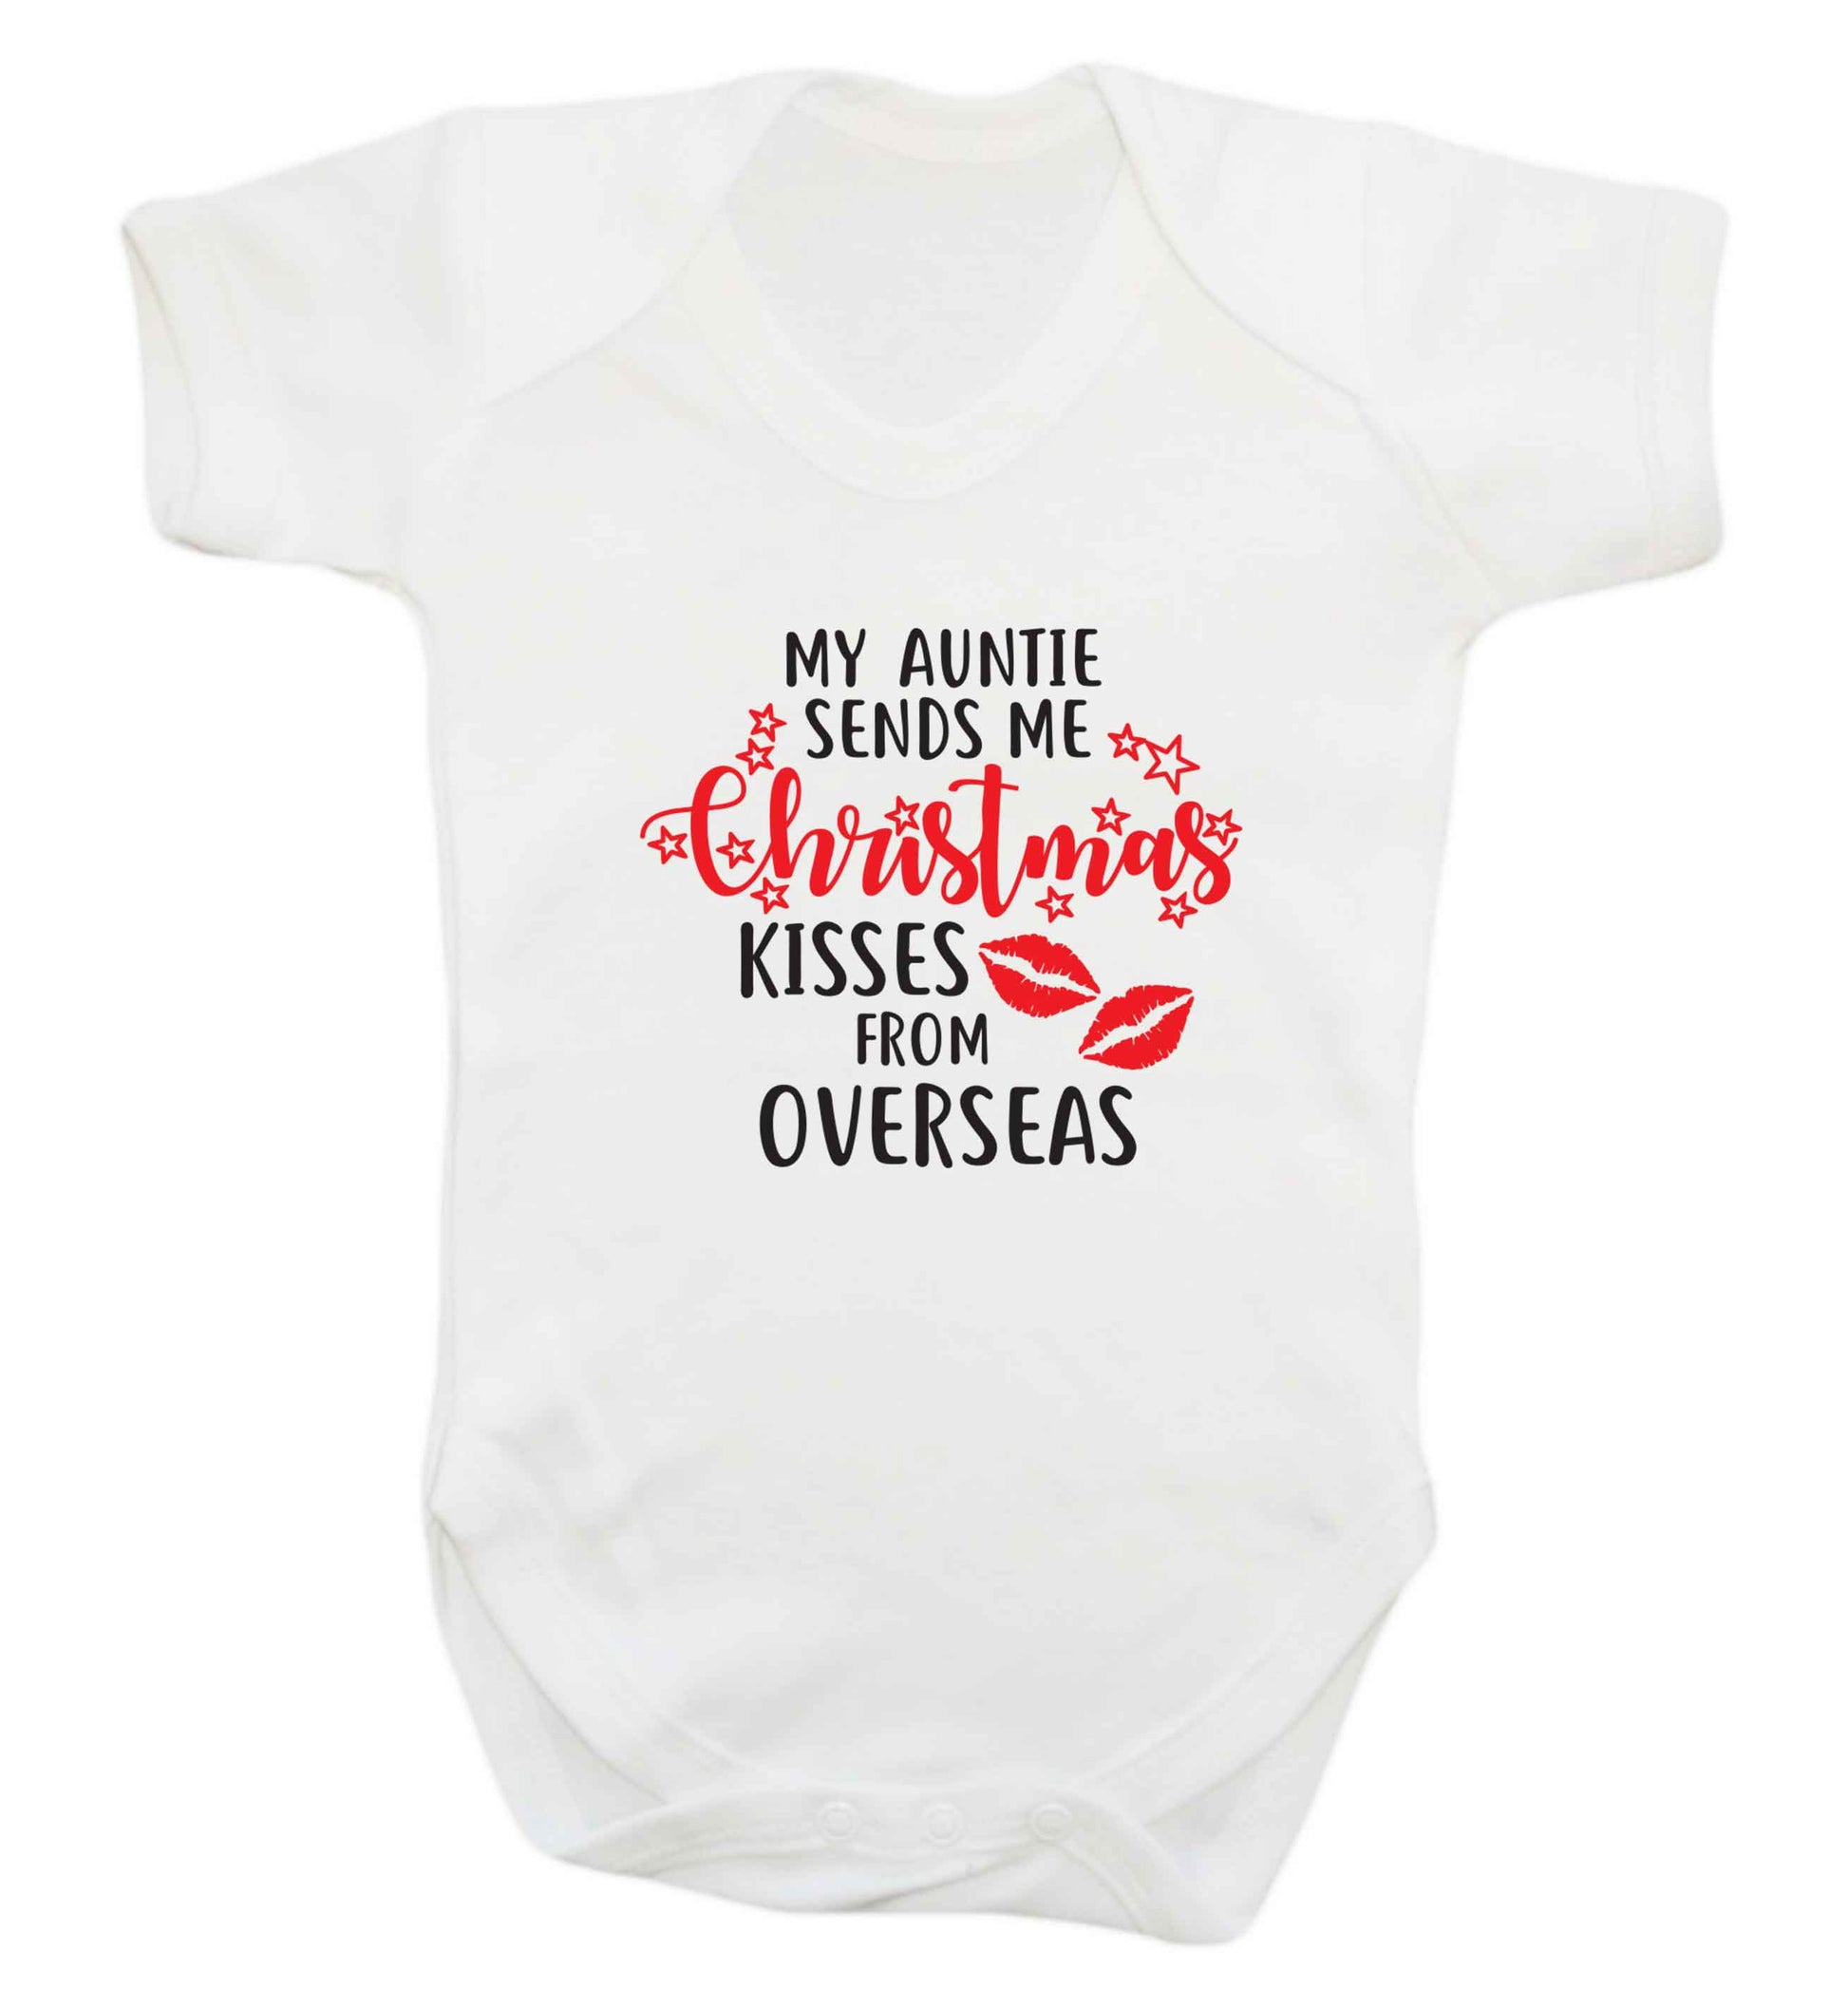 Auntie Christmas Kisses Overseas baby vest white 18-24 months